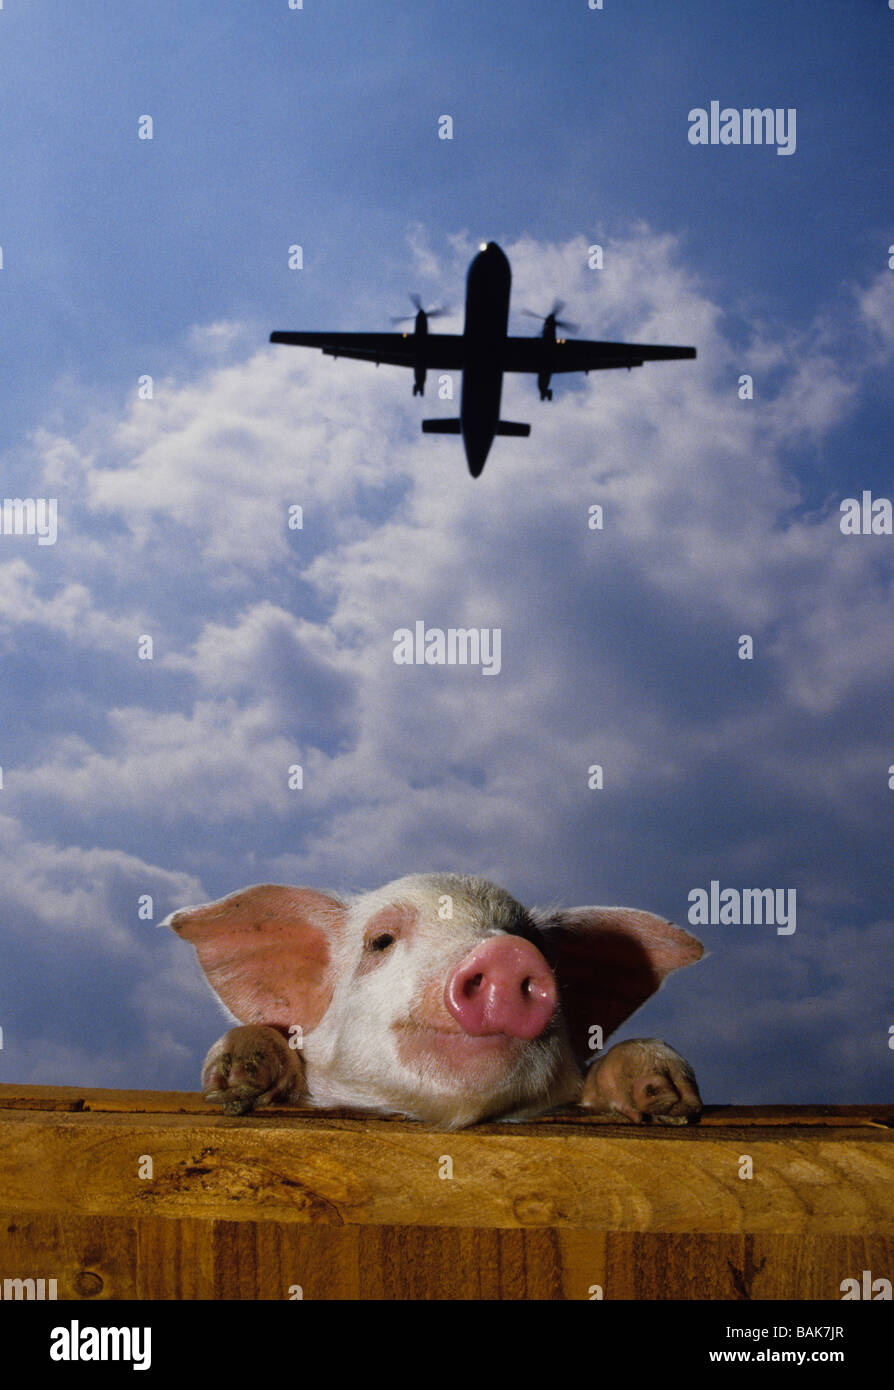 A pig watches an aircraft taking off Stock Photo